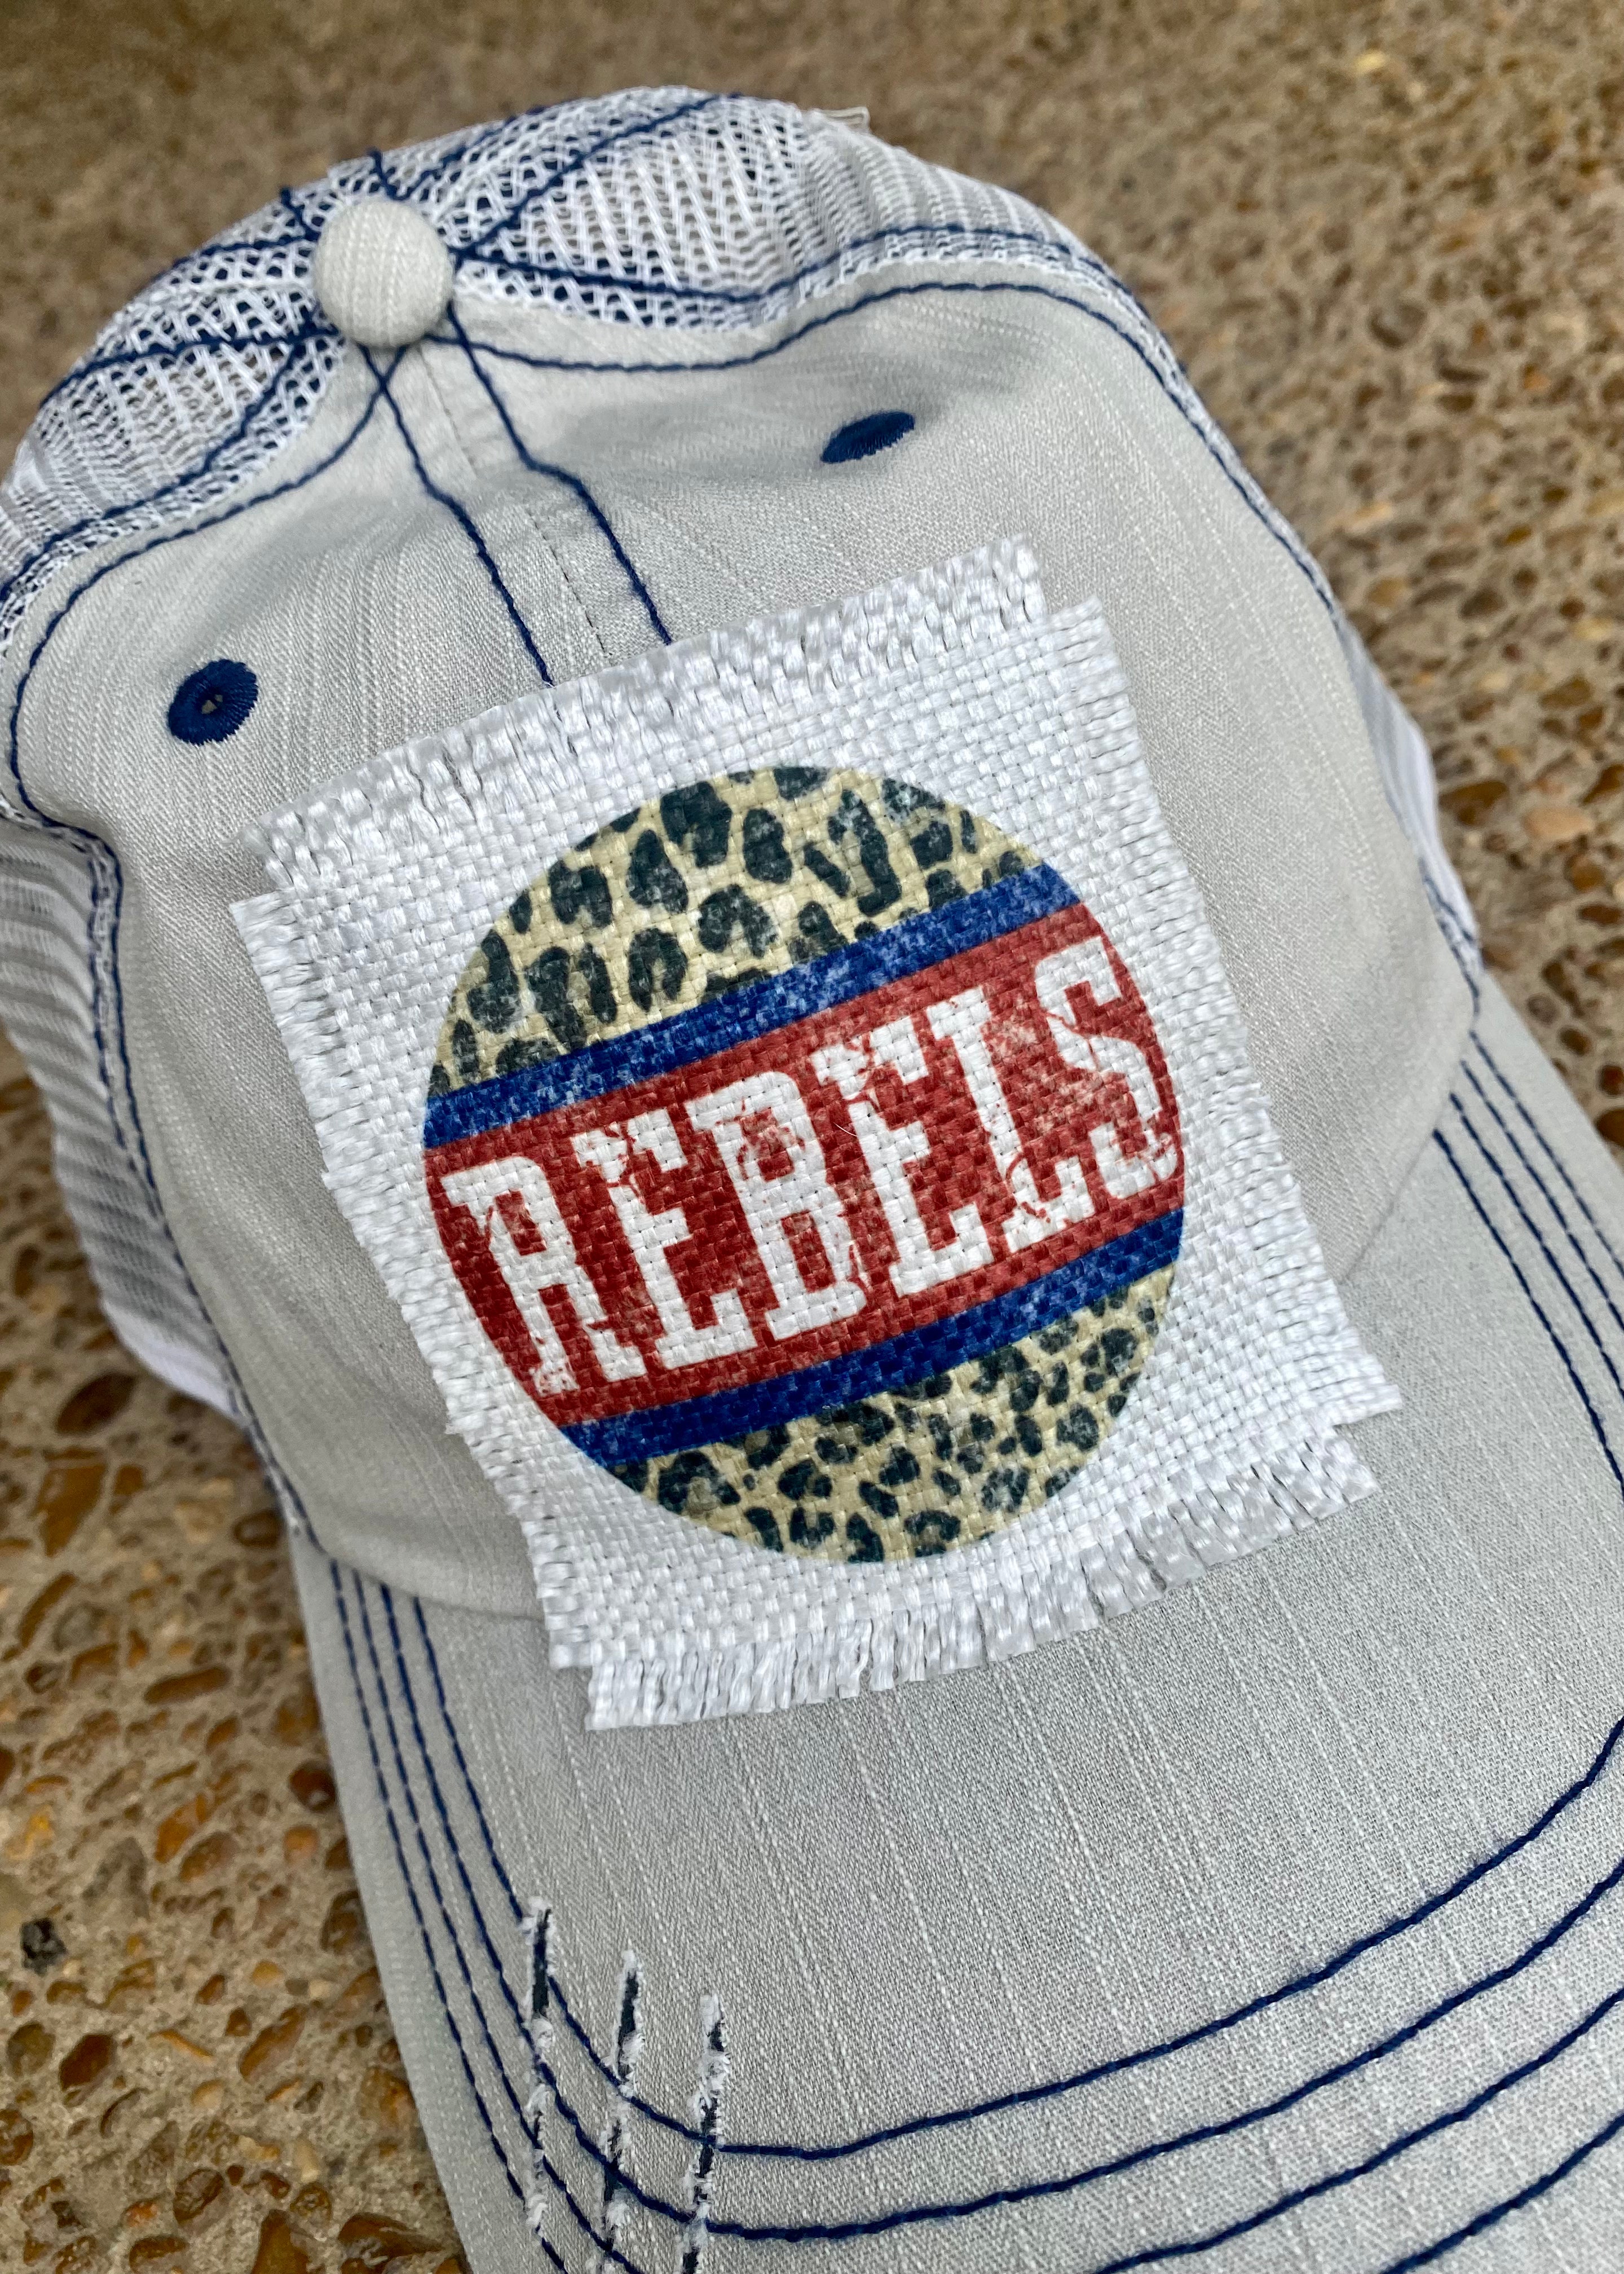 Cream Rebels Patch Trucker Ball Cap - Ball Cap -Jimberly's Boutique-Olive Branch-Mississippi